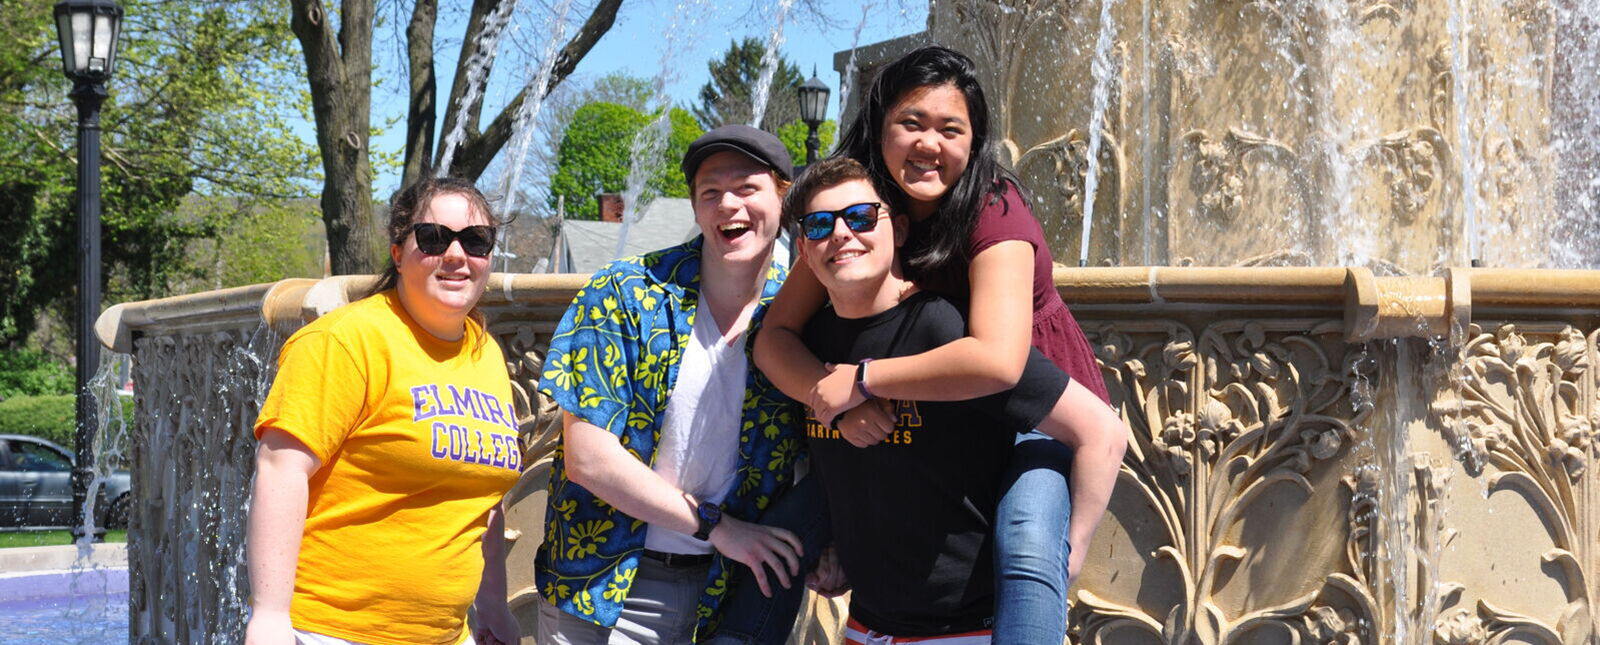 Four Elmira College alumni, one riding piggy back, smile for a picture in the fountain